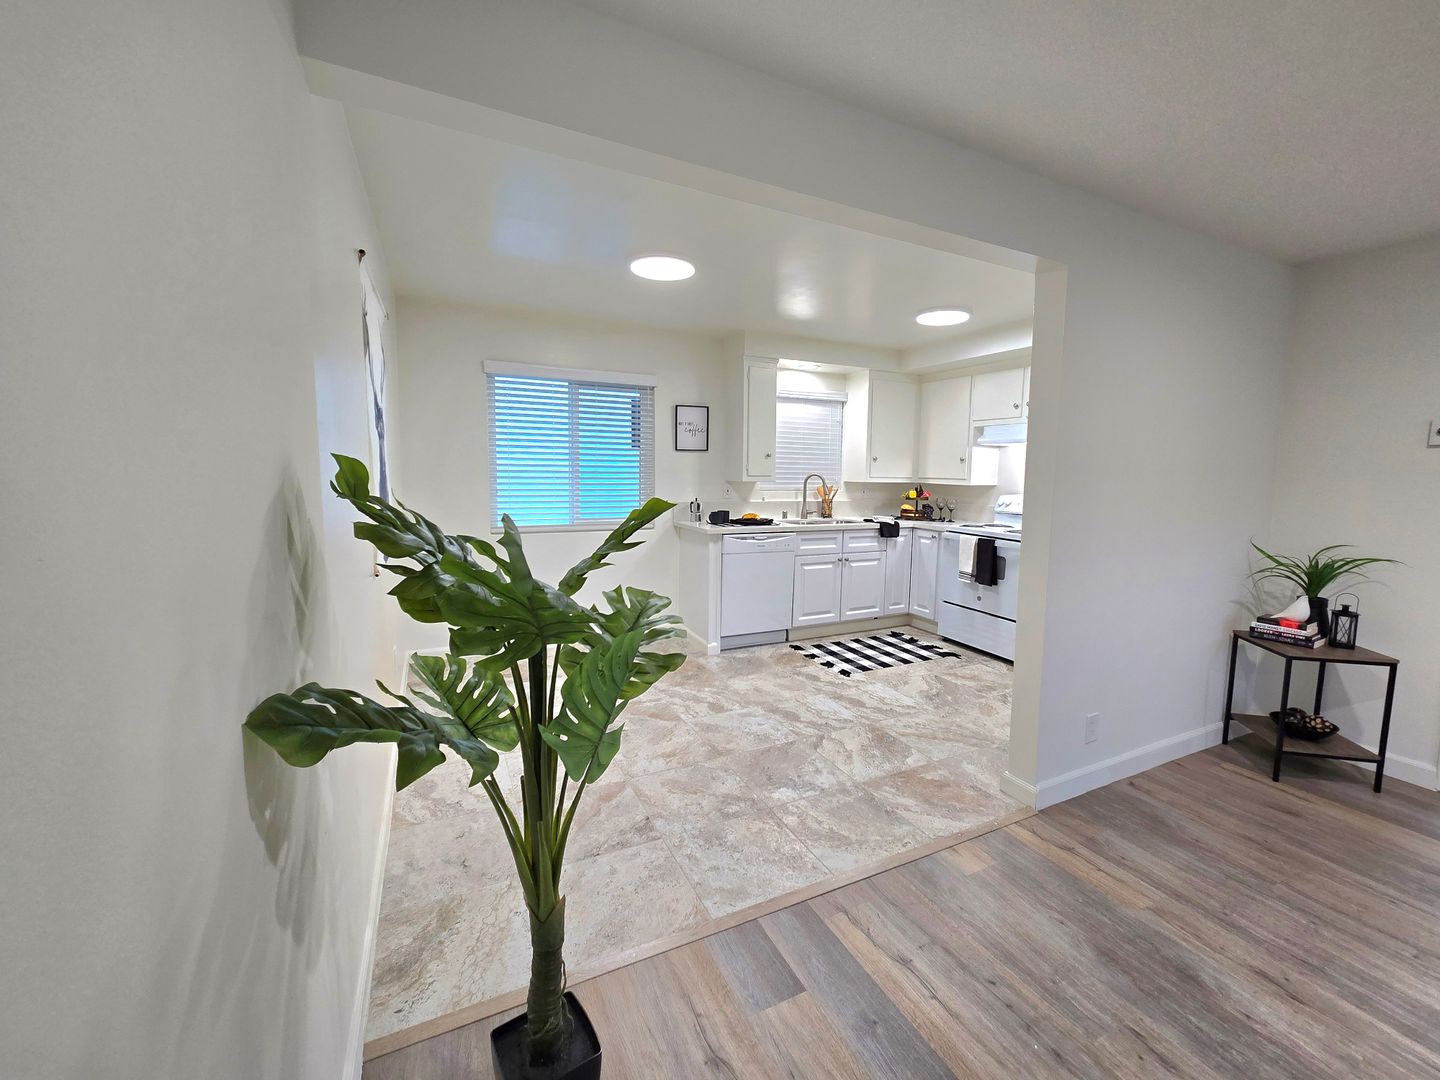 Fully Renovated 2/2 located on Quiet Cul-de-sac Street in West Torrance